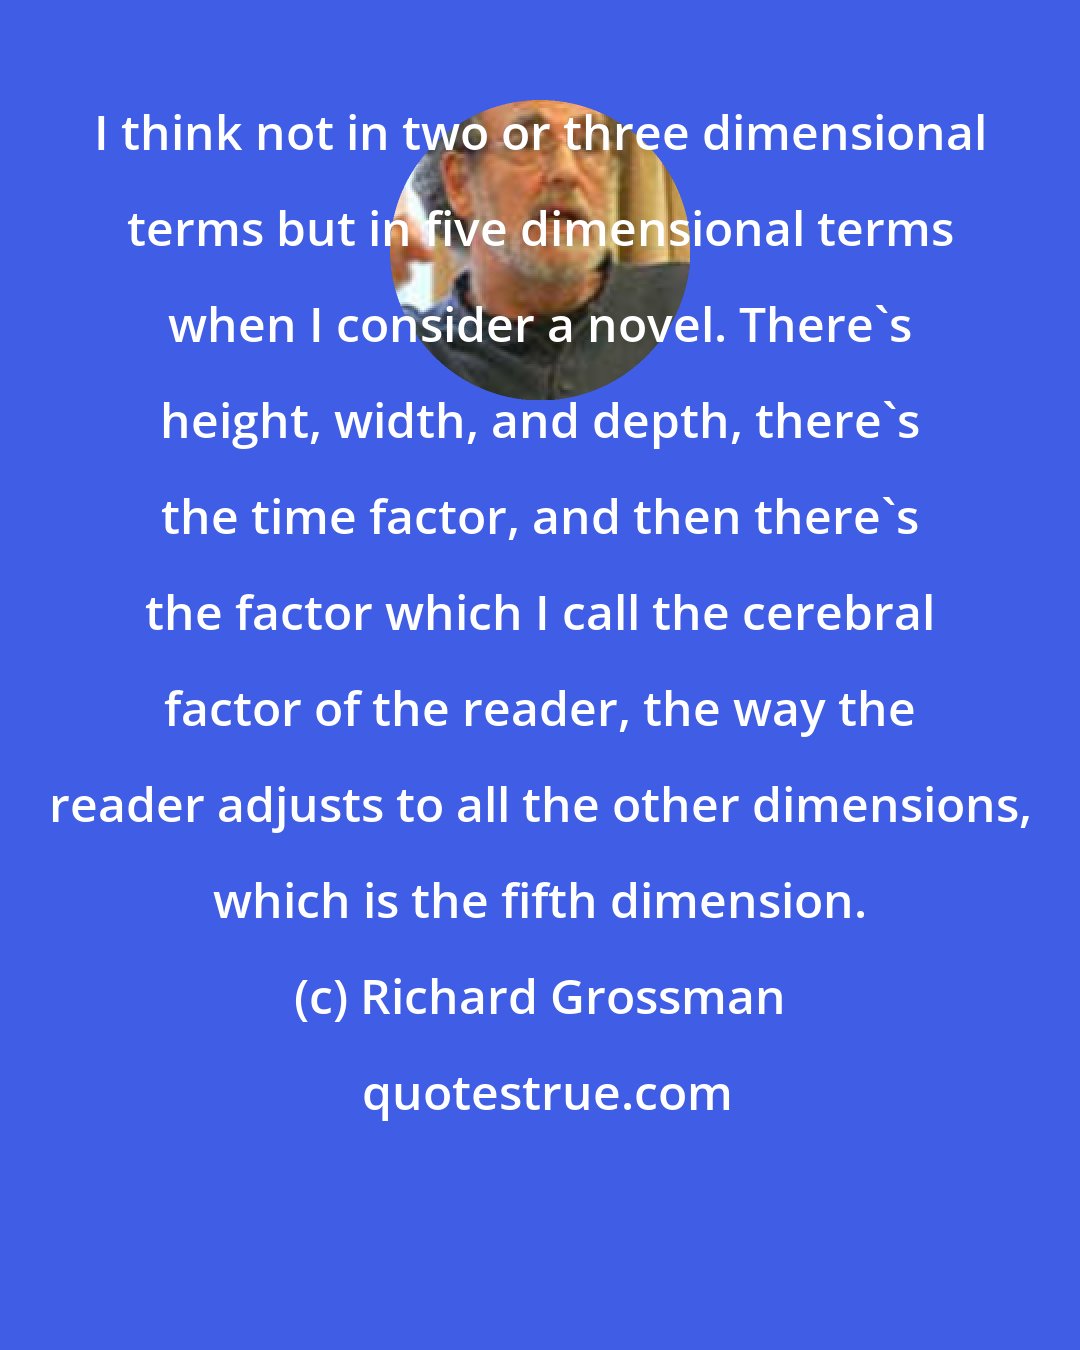 Richard Grossman: I think not in two or three dimensional terms but in five dimensional terms when I consider a novel. There's height, width, and depth, there's the time factor, and then there's the factor which I call the cerebral factor of the reader, the way the reader adjusts to all the other dimensions, which is the fifth dimension.